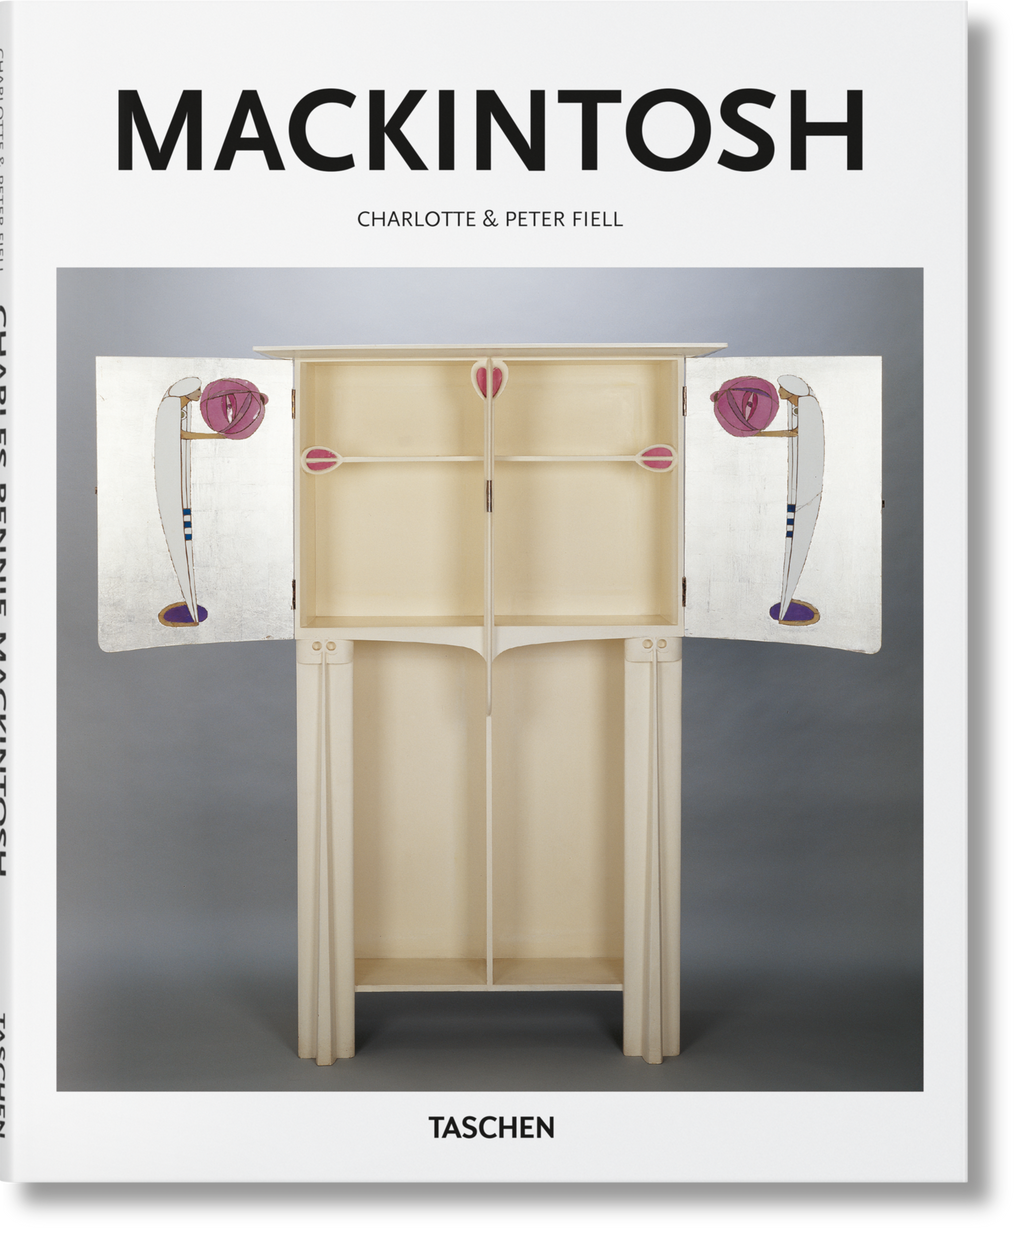 Mackintosh by Charlotte & Peter Fiell